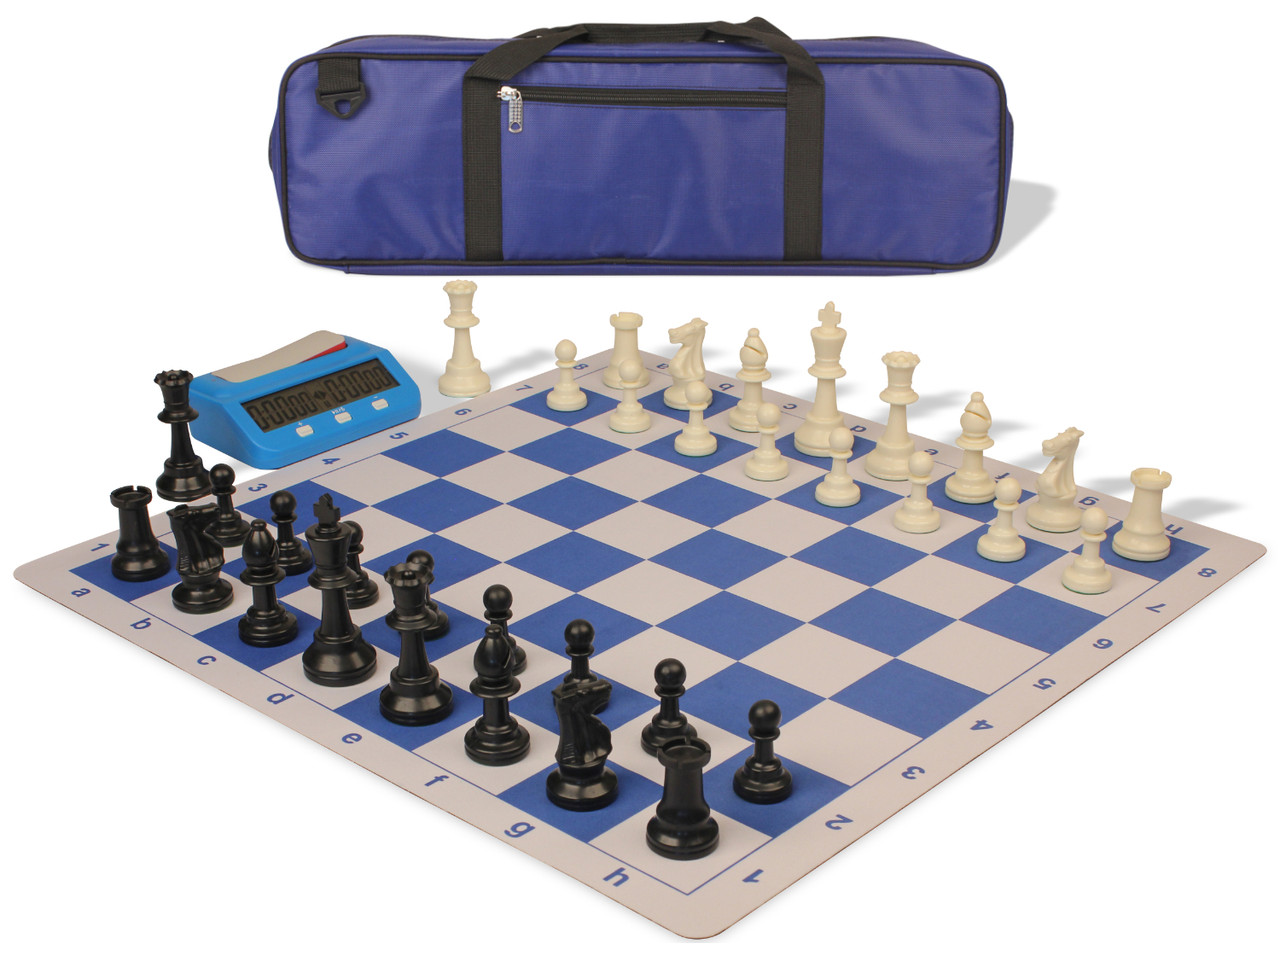 Executive Plastic Chess Set Black & Ivory Pieces with Vinyl Roll-up Board -  Blue - The Chess Store